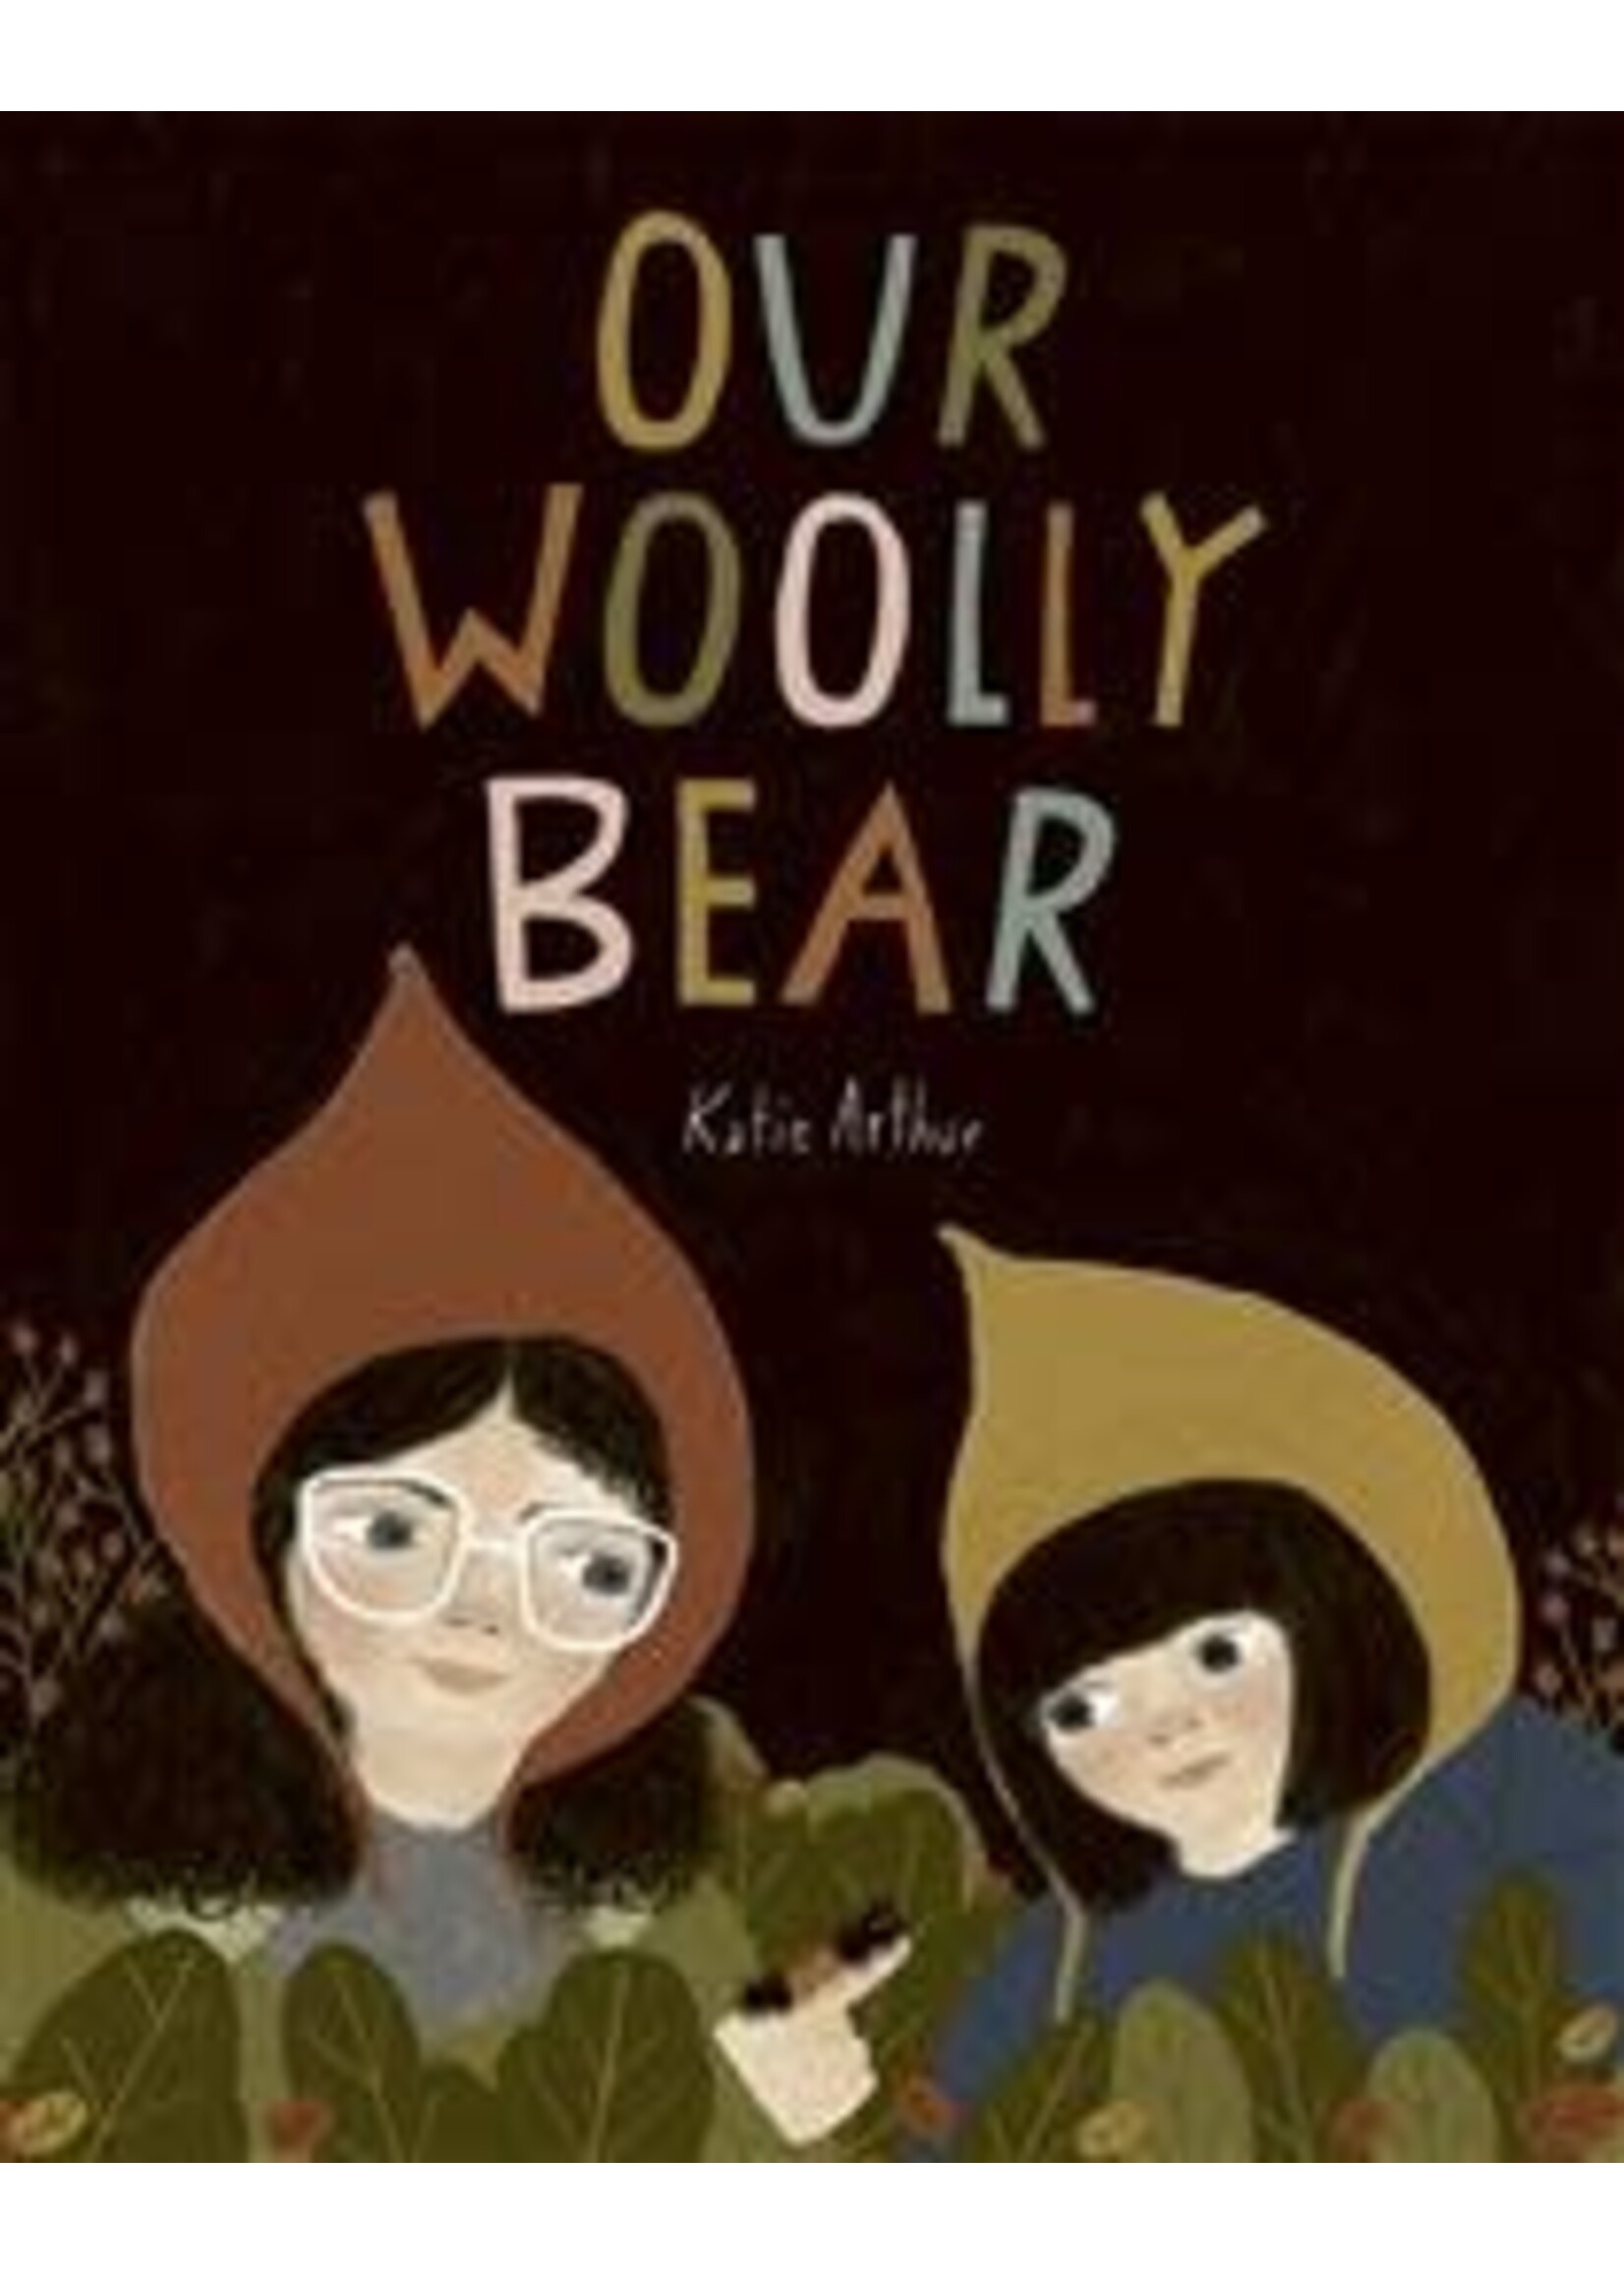 Our Woolly Bear by Katie Arthur